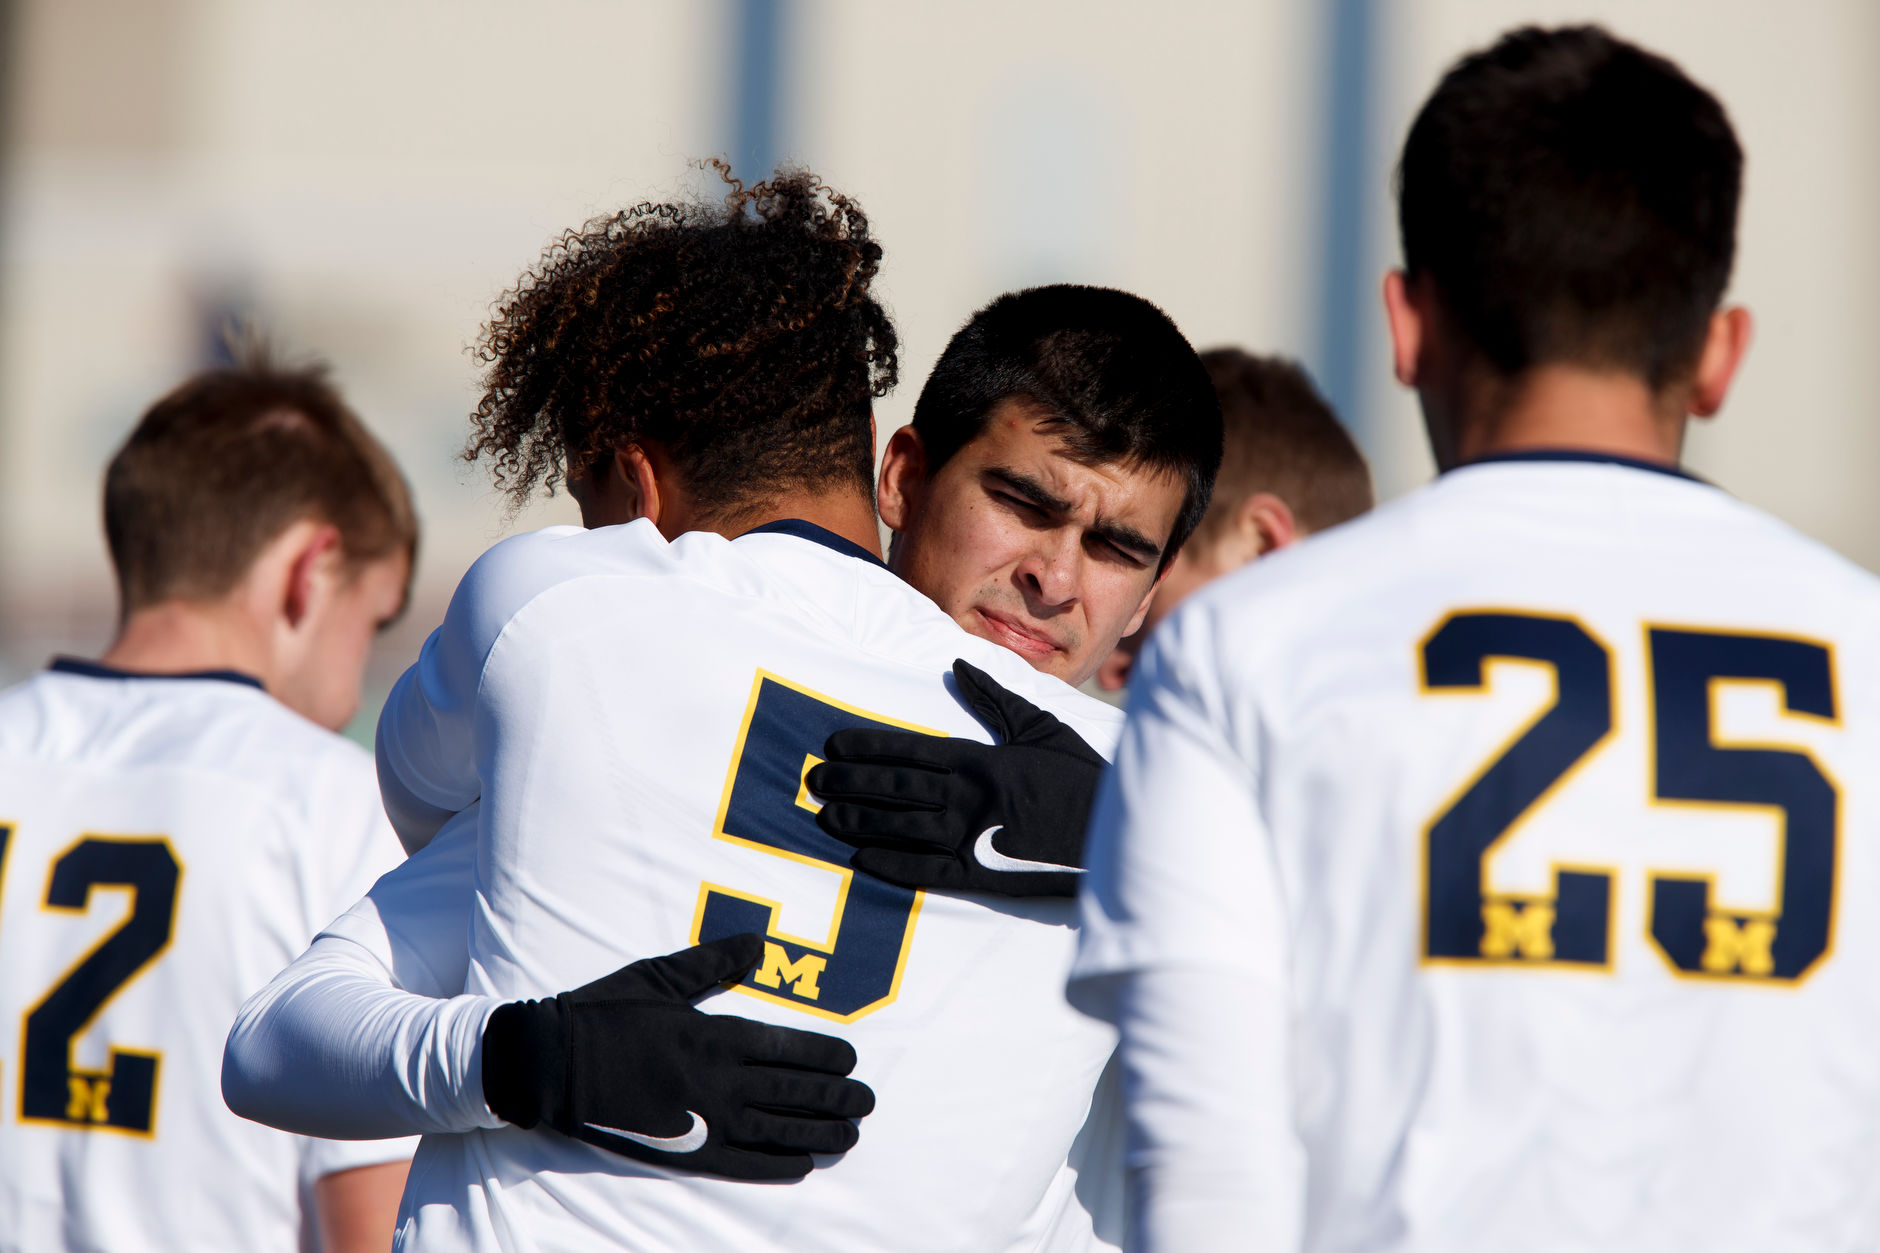 Michigan's Marc Ybarra, center, and Abdou Samake (5) hug before the Big Ten Men's Soccer Tournament championship game against Indiana at Grand Park in Westfield, Indiana on Sunday, Nov. 11, 2018. (Photo by James Brosher)